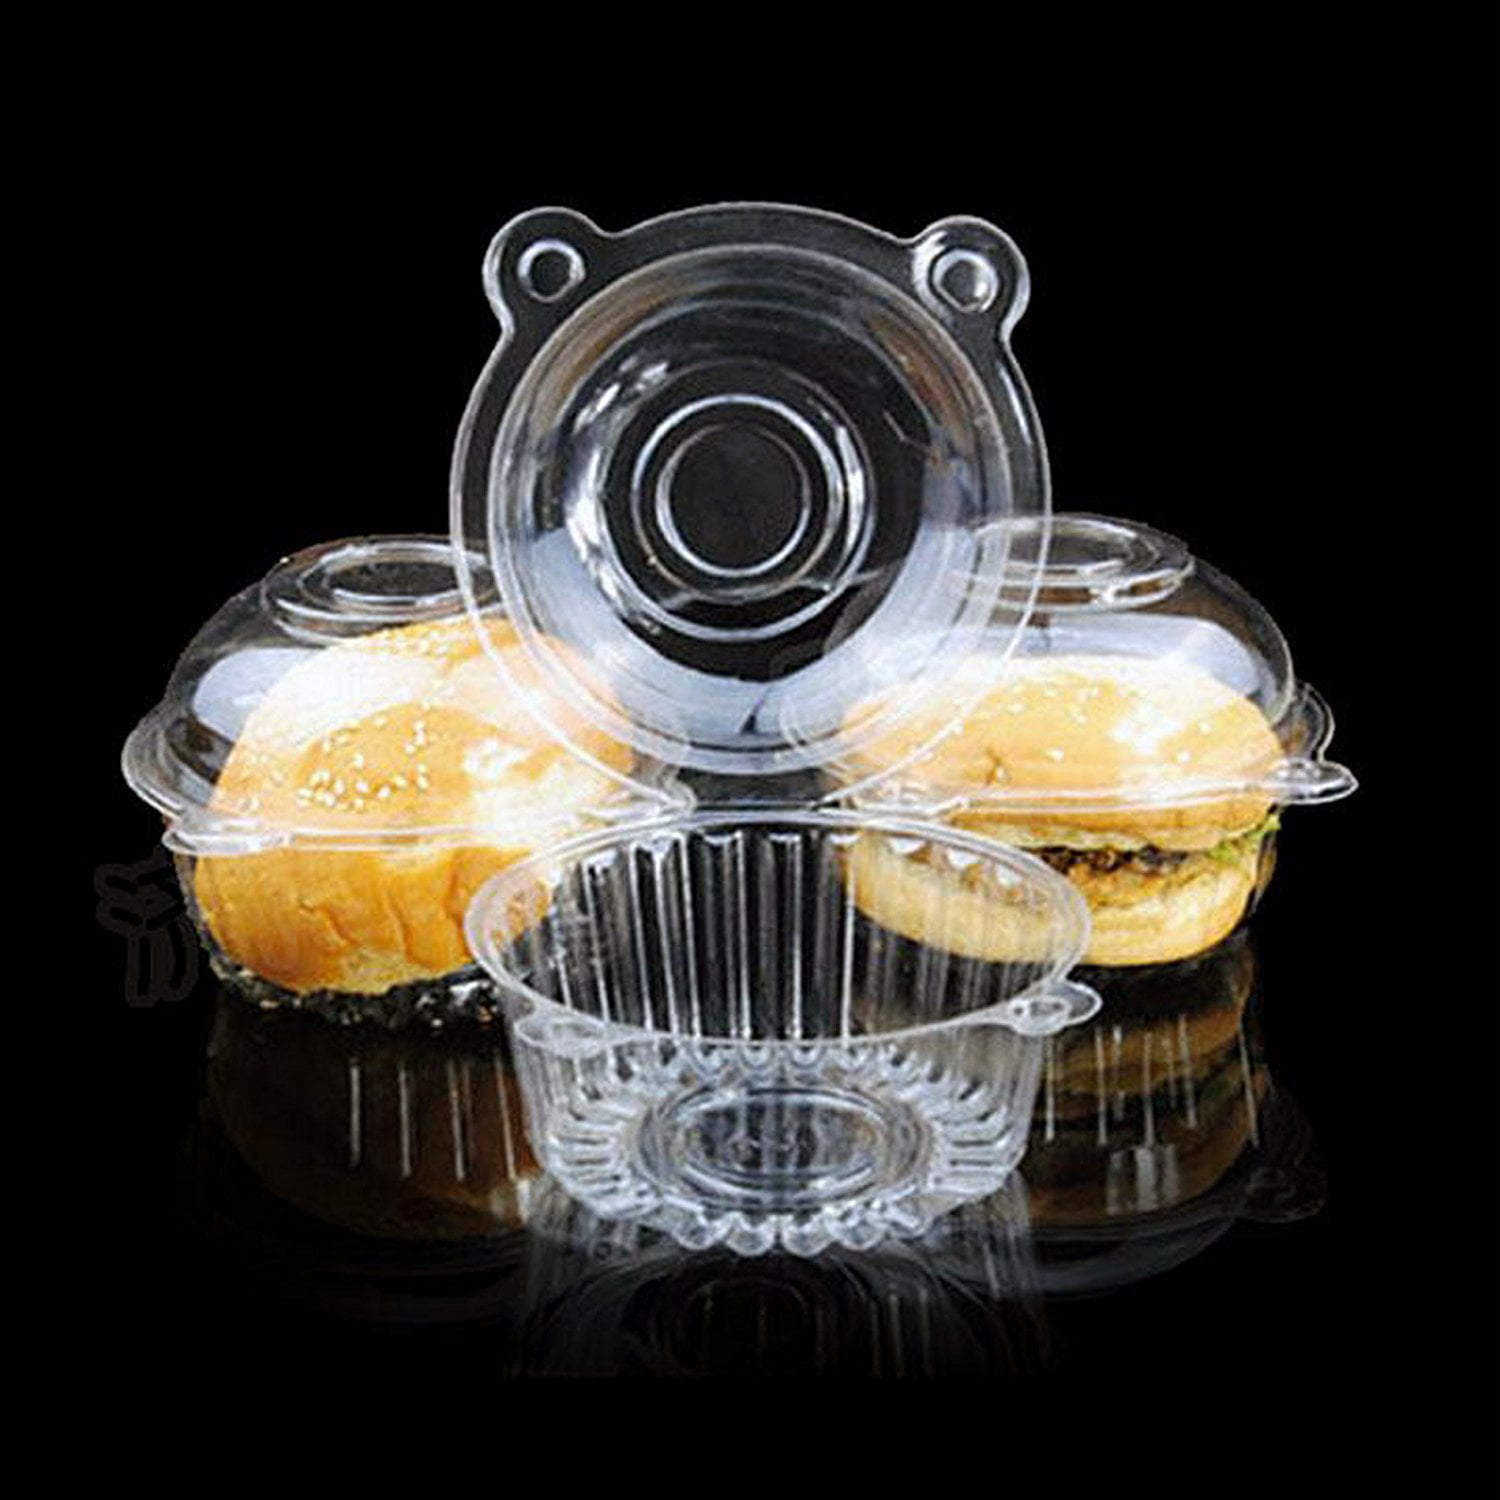 Set of 50 Aftermarket 50 x Plastic Single Individual Cupcake Muffin Dome Holders Cases Boxes Cups Pods 